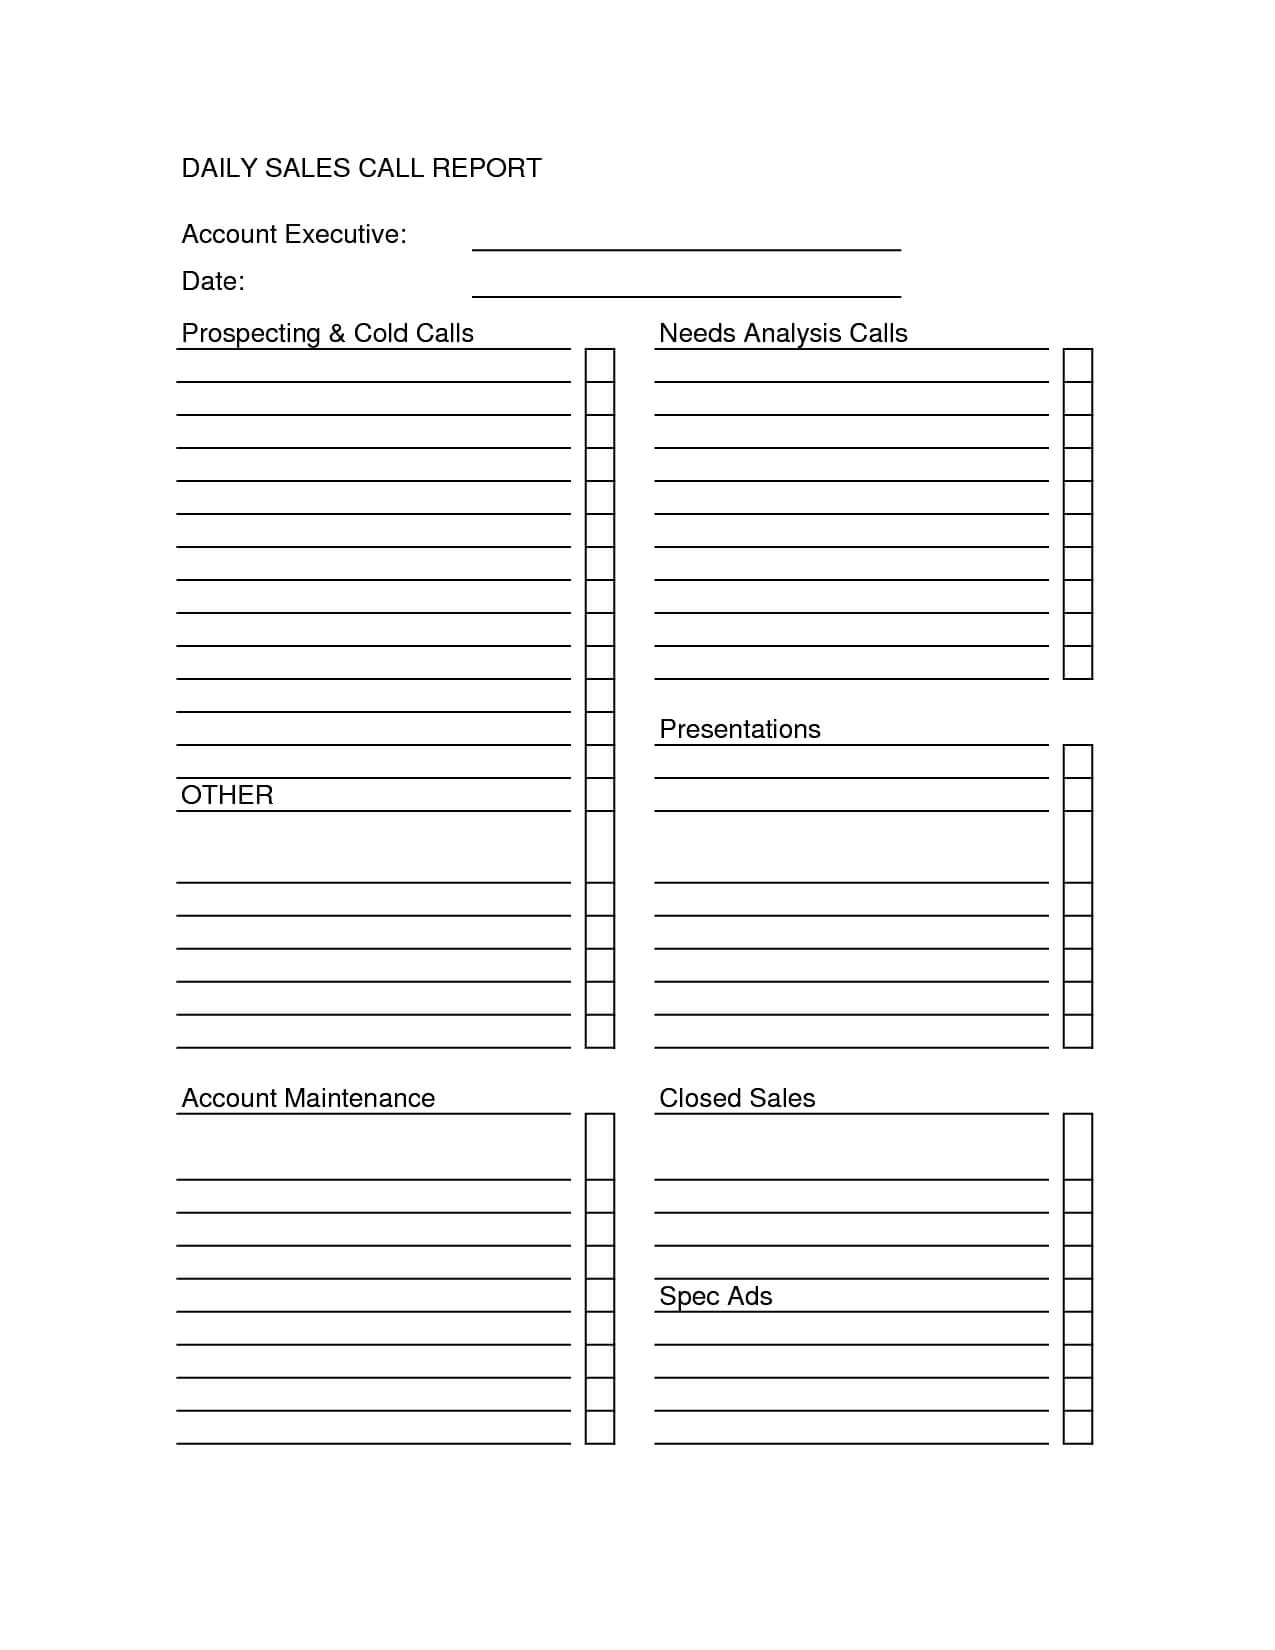 Sales Call Report Templates - Word Excel Fomats For Sales Call Reports Templates Free